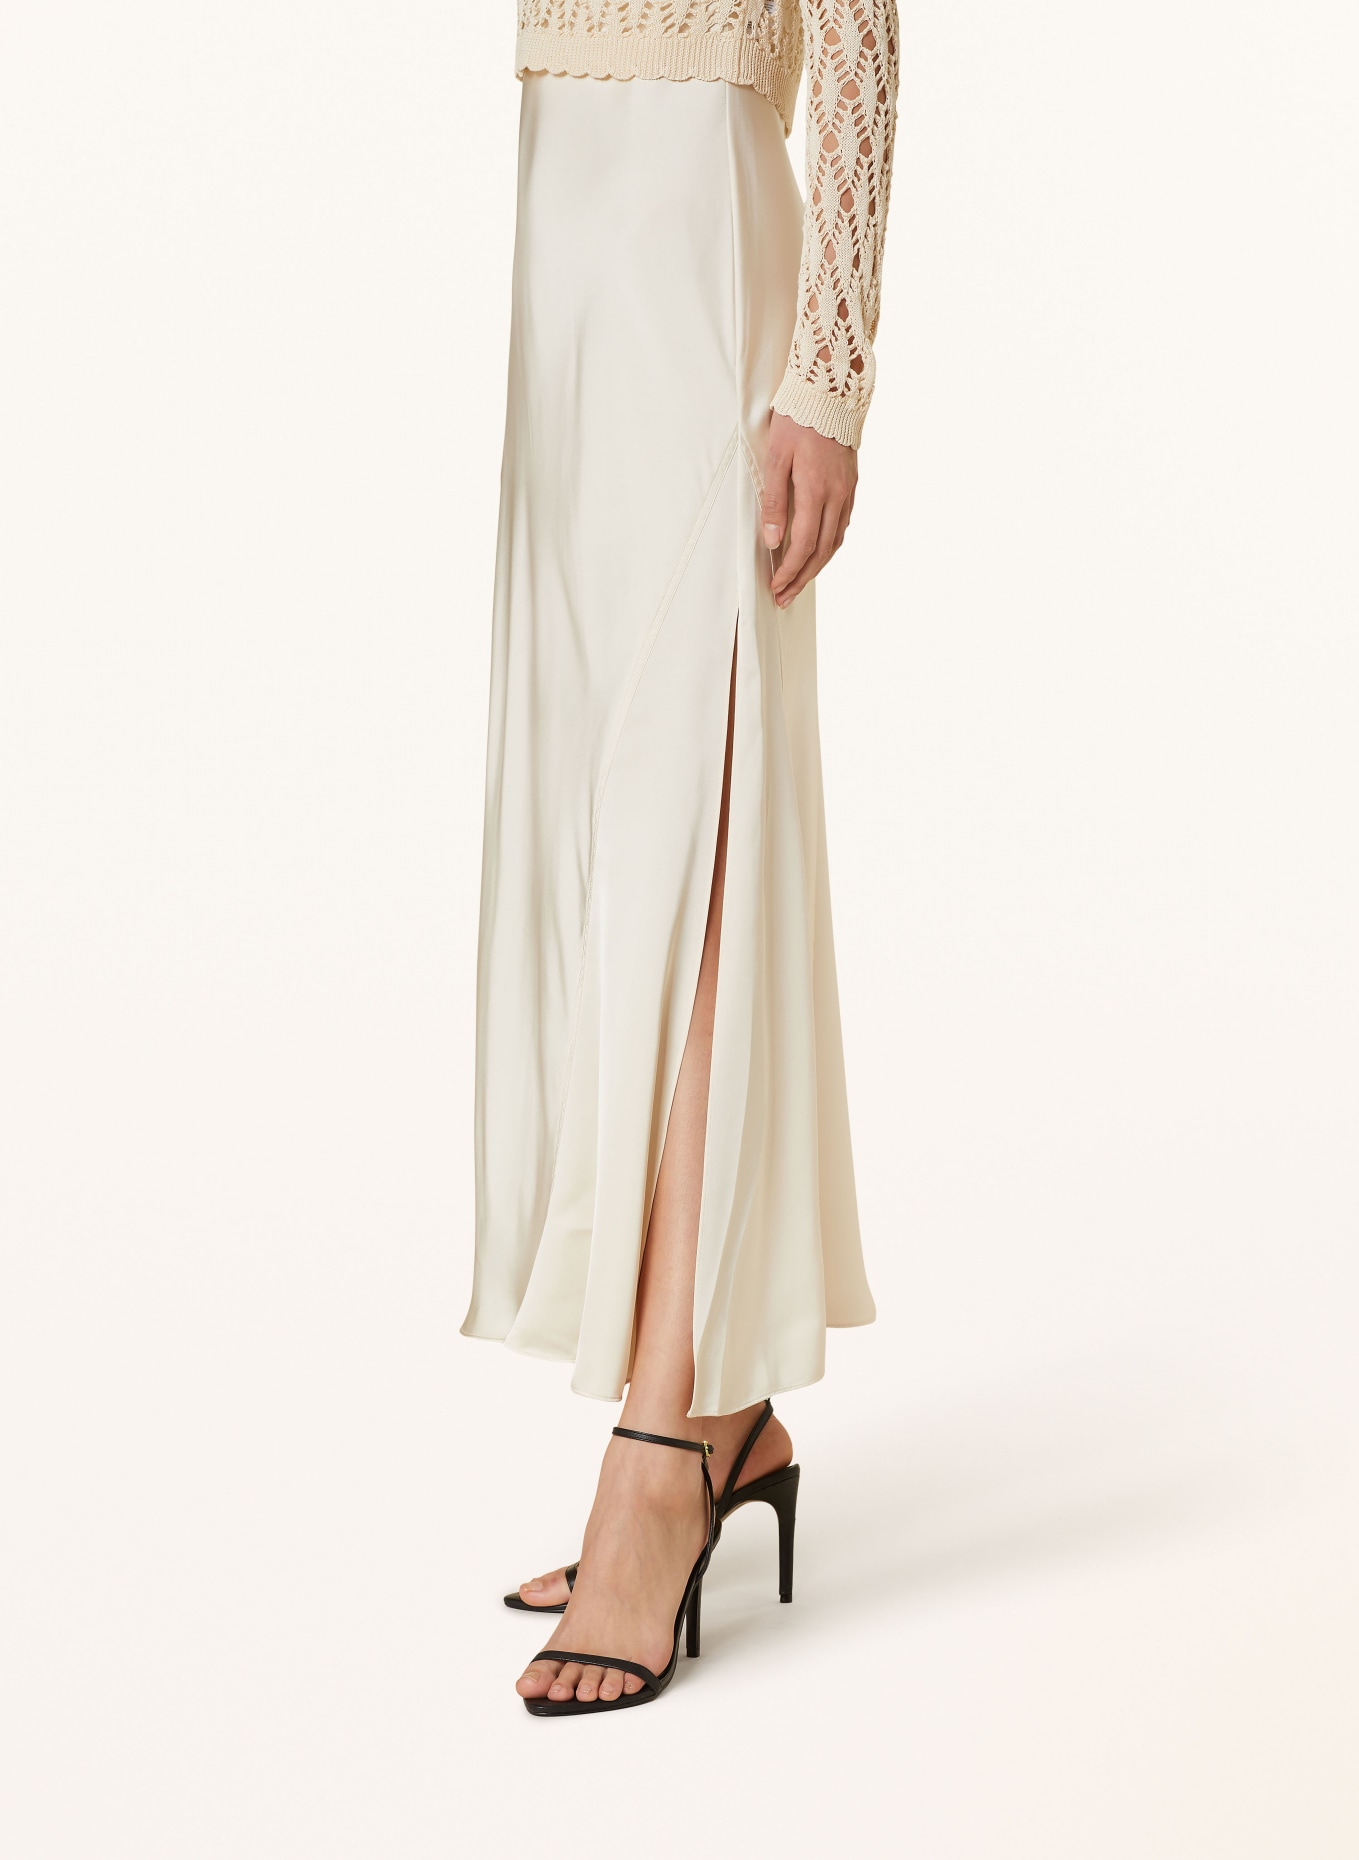 ALLSAINTS 2-in-1 dress ERIN in mixed materials, Color: CREAM (Image 4)